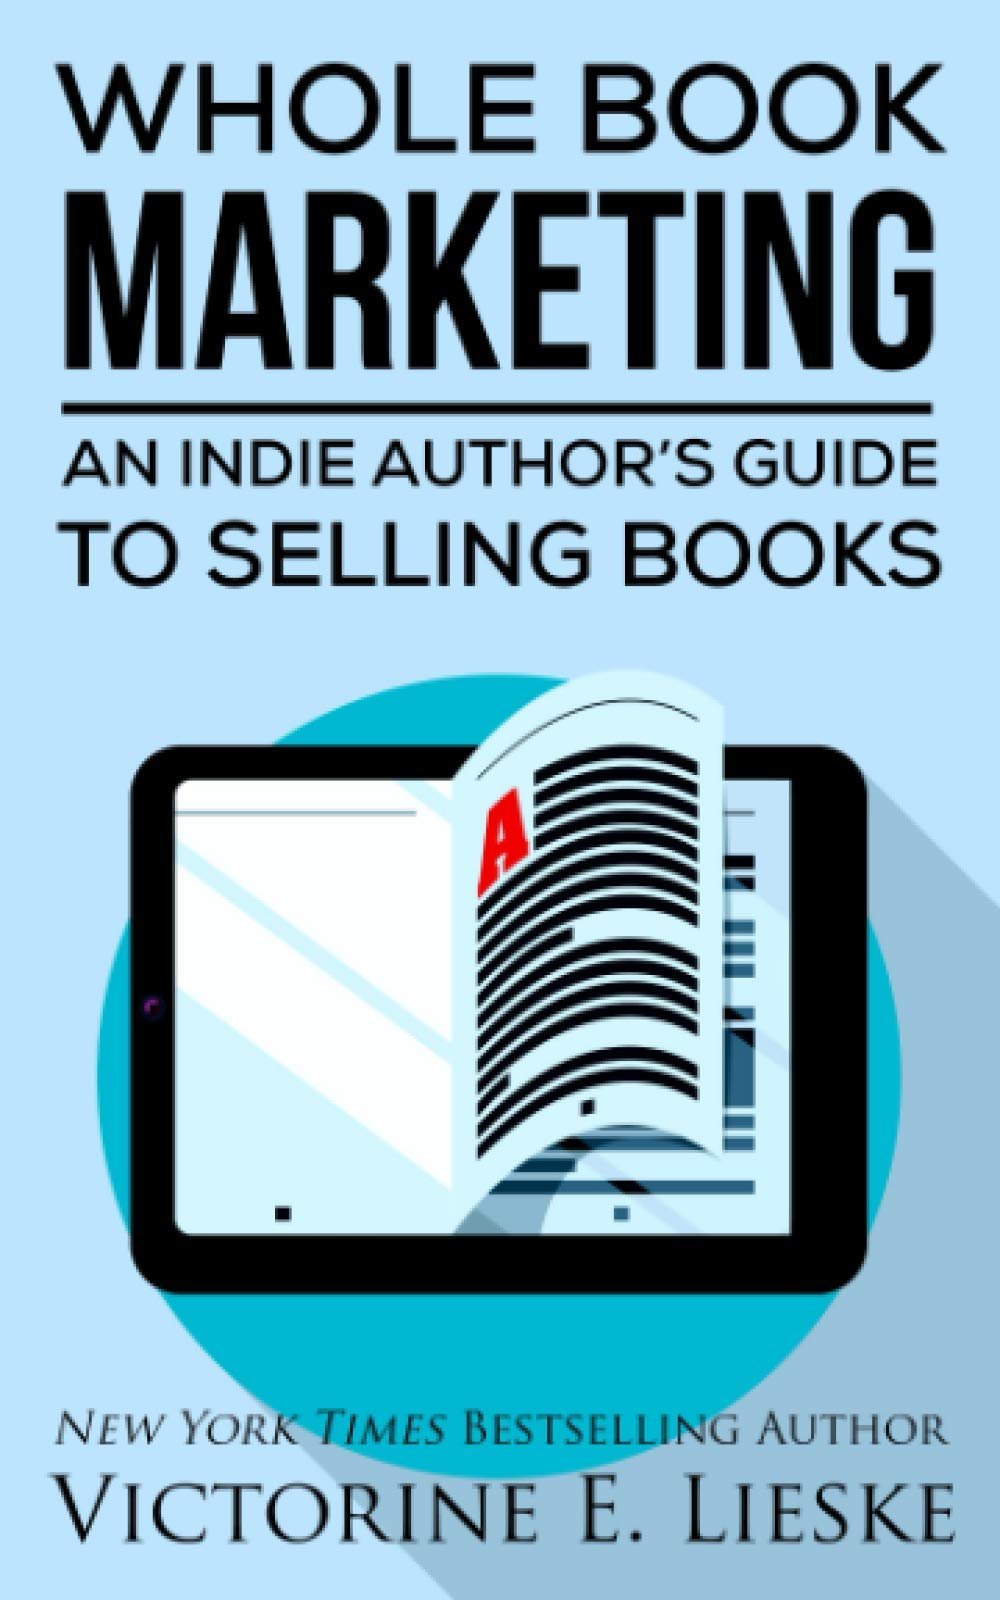 Whole Book Marketing: An Indie Author's Guide to Selling Books by Victorine E. Lieske